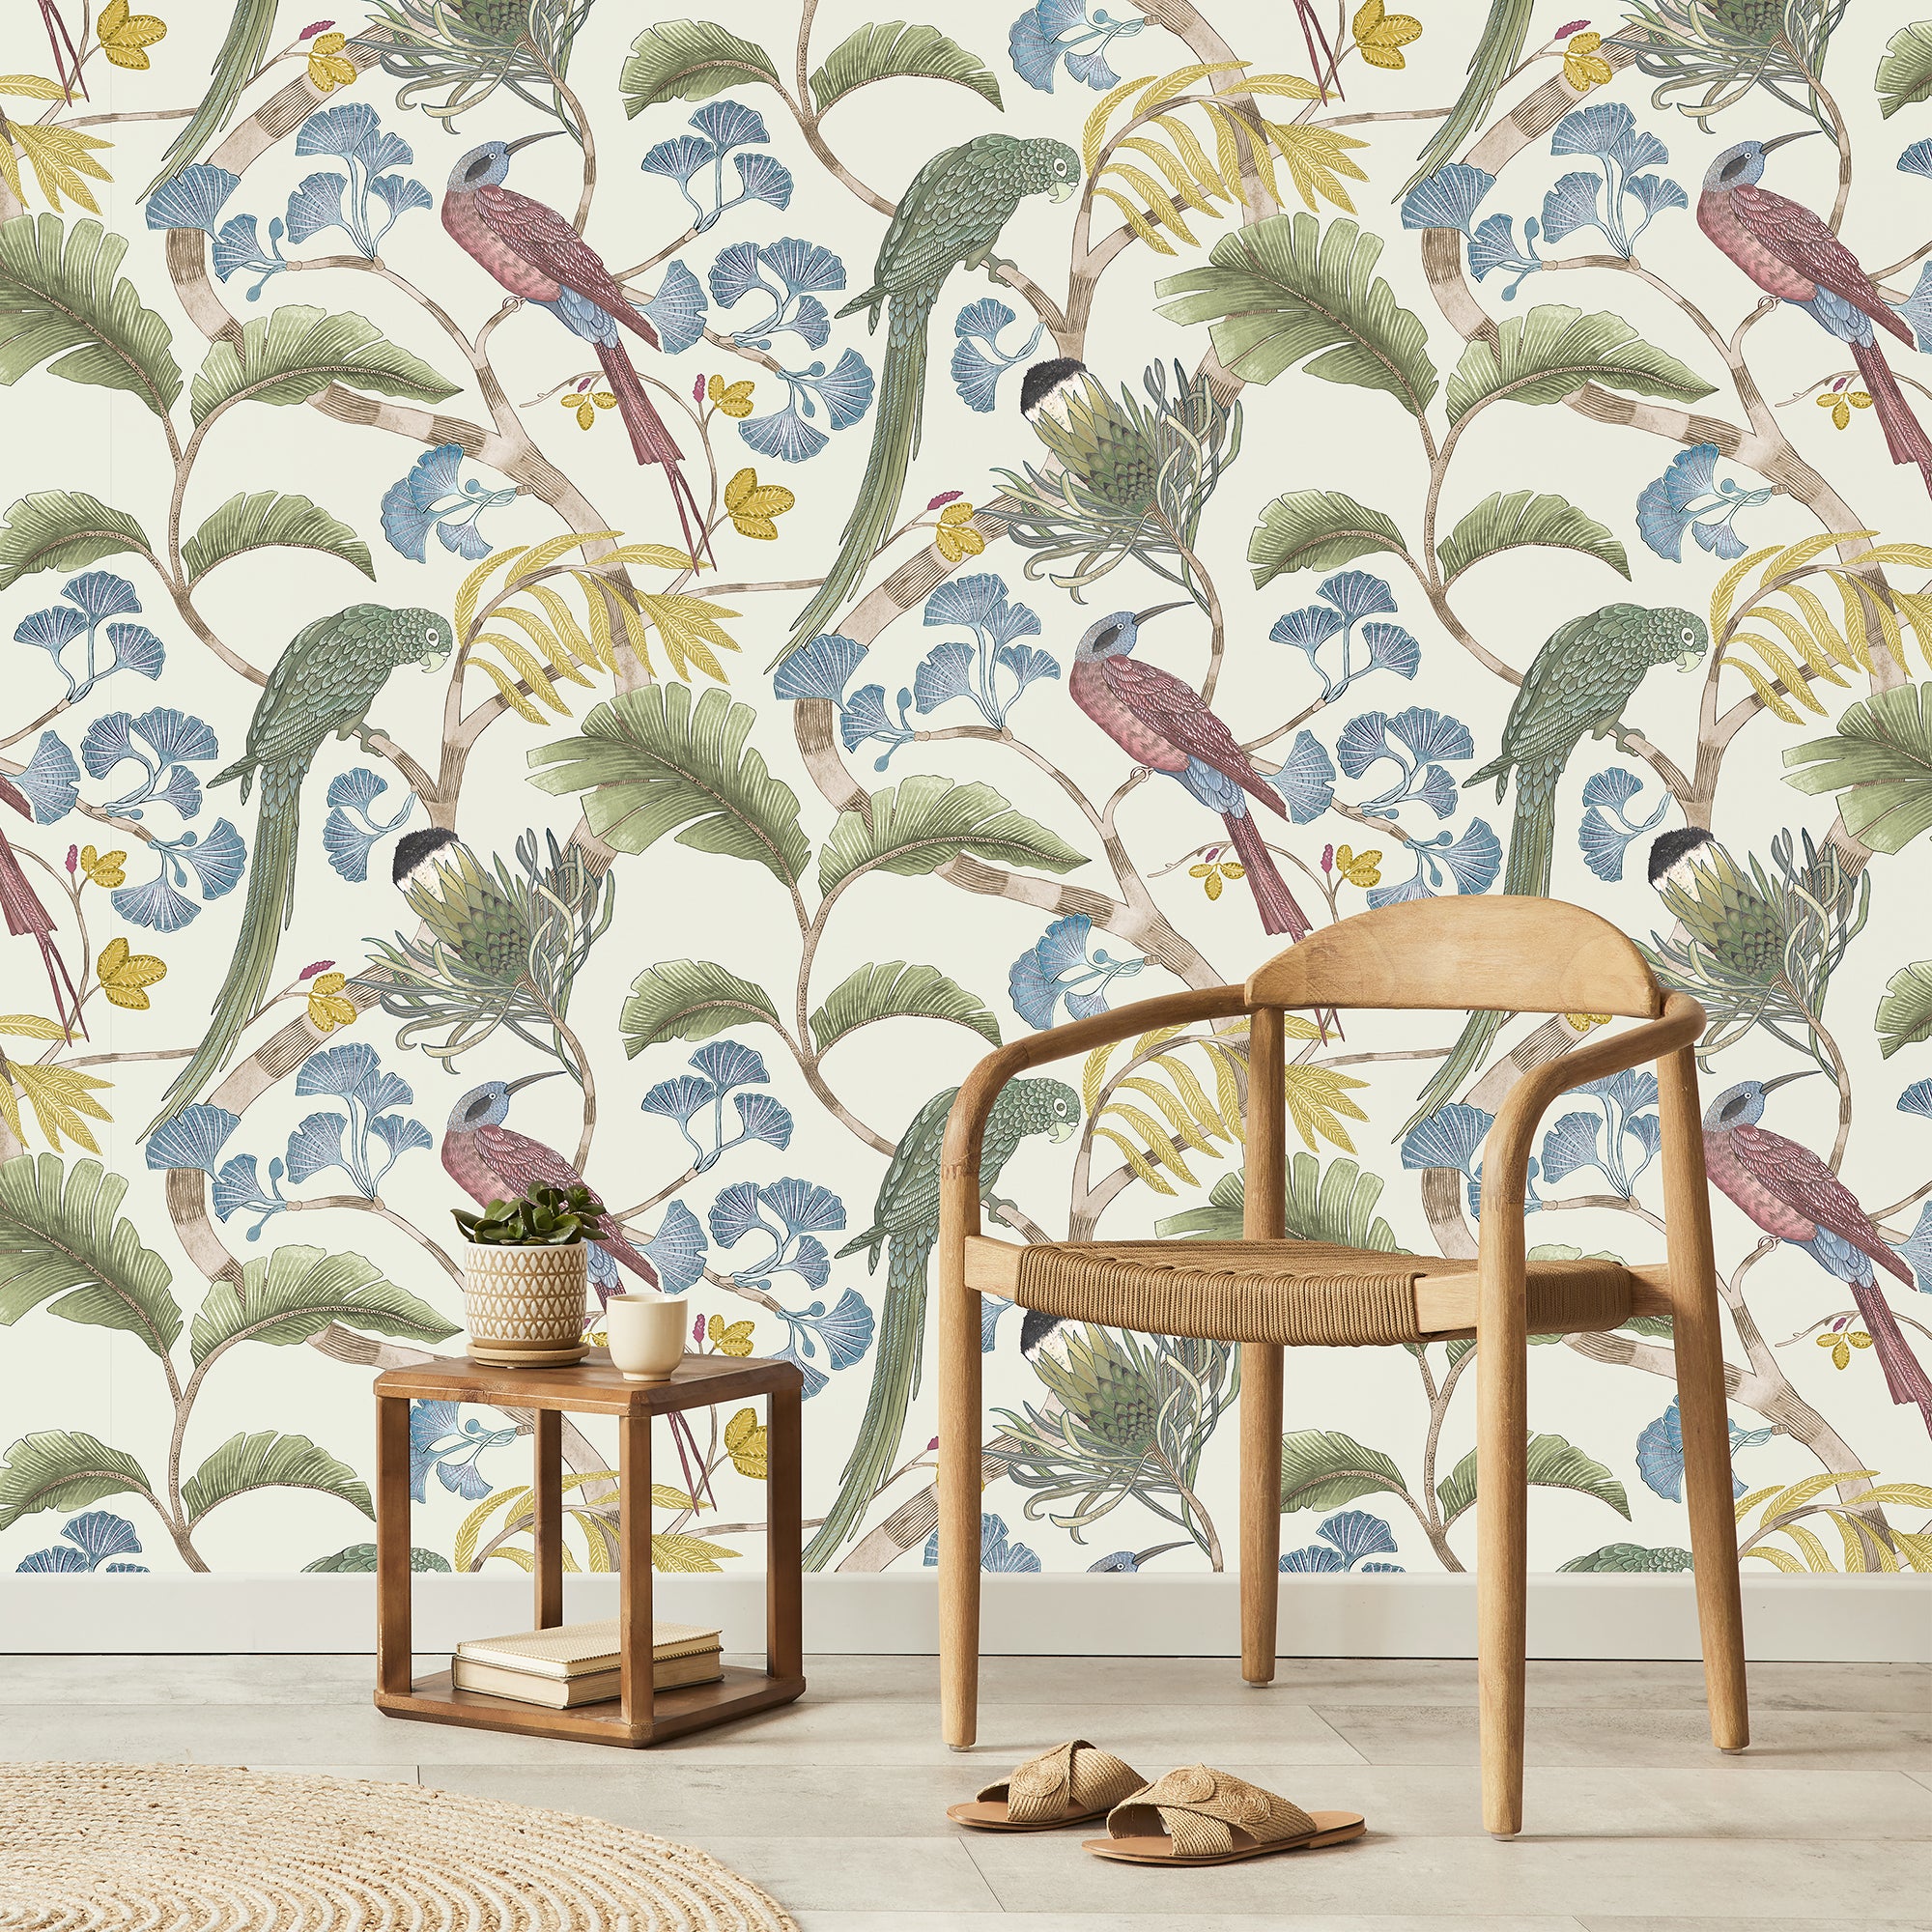 Sale 15% Off Josephine Munsey Wallpapers at Beaumonde.co.uk